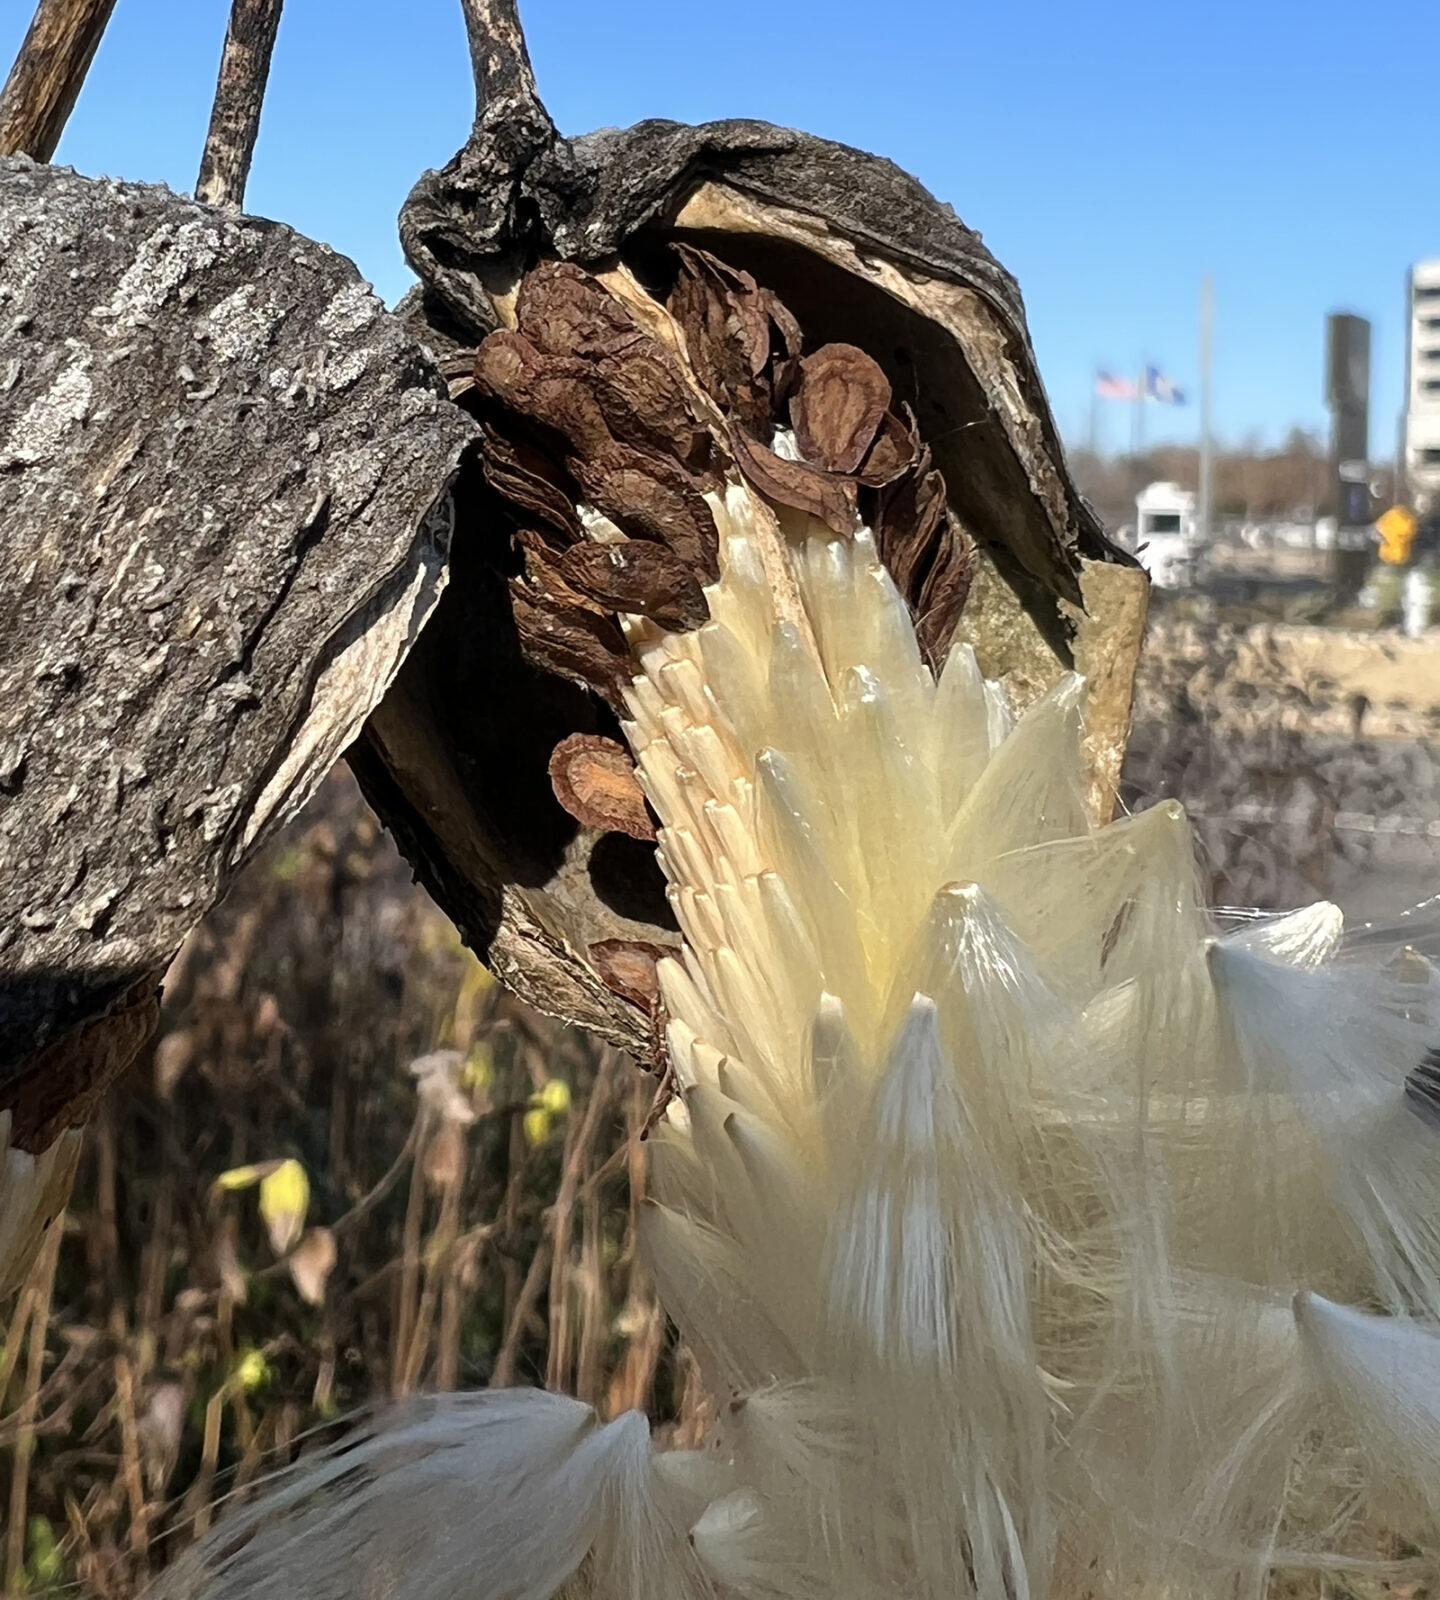 A photo of an open milkweed pod, spilling out floss and seeds.